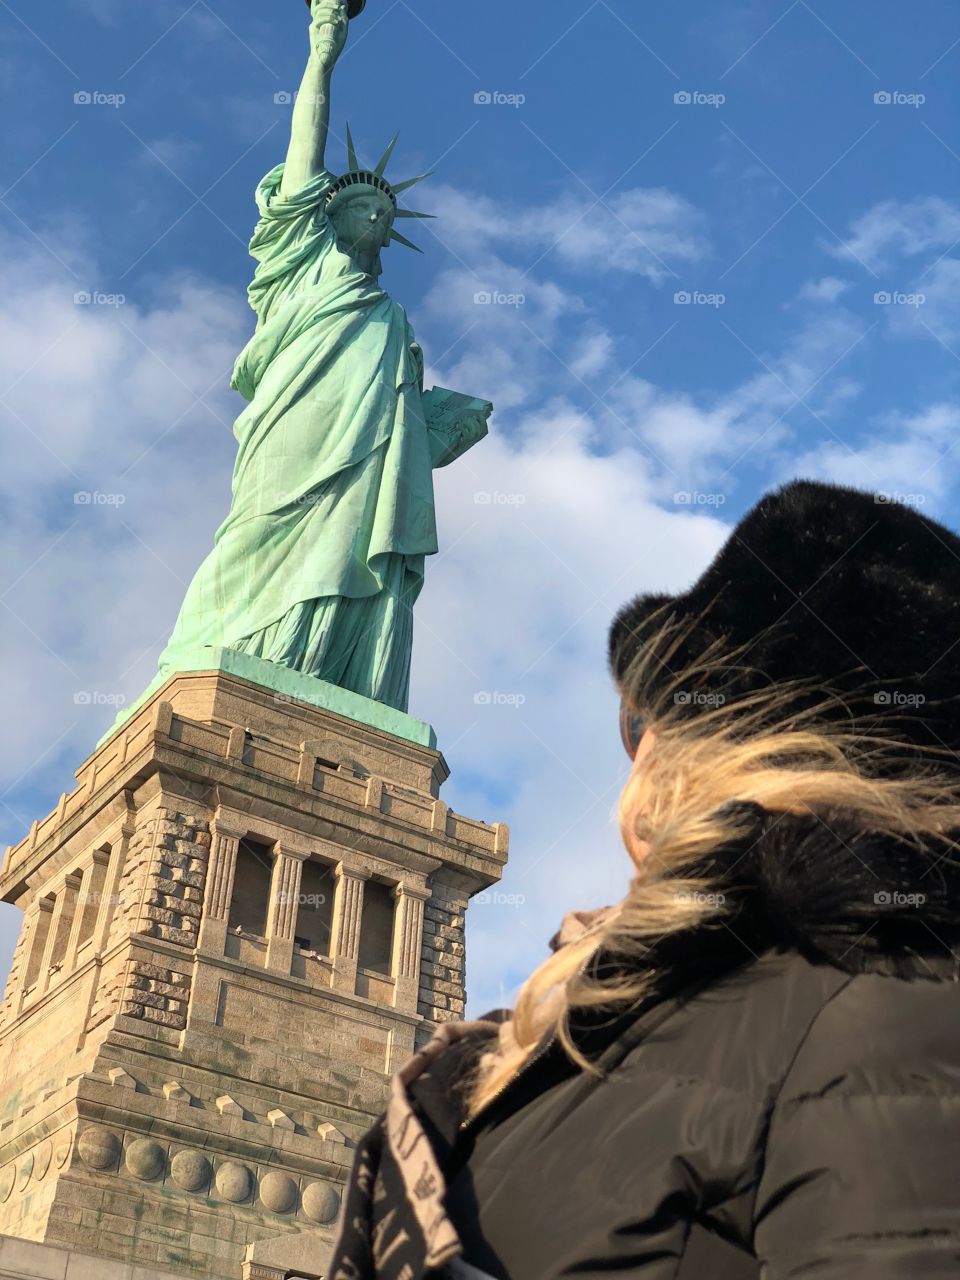 Looking at Statue of Liberty 